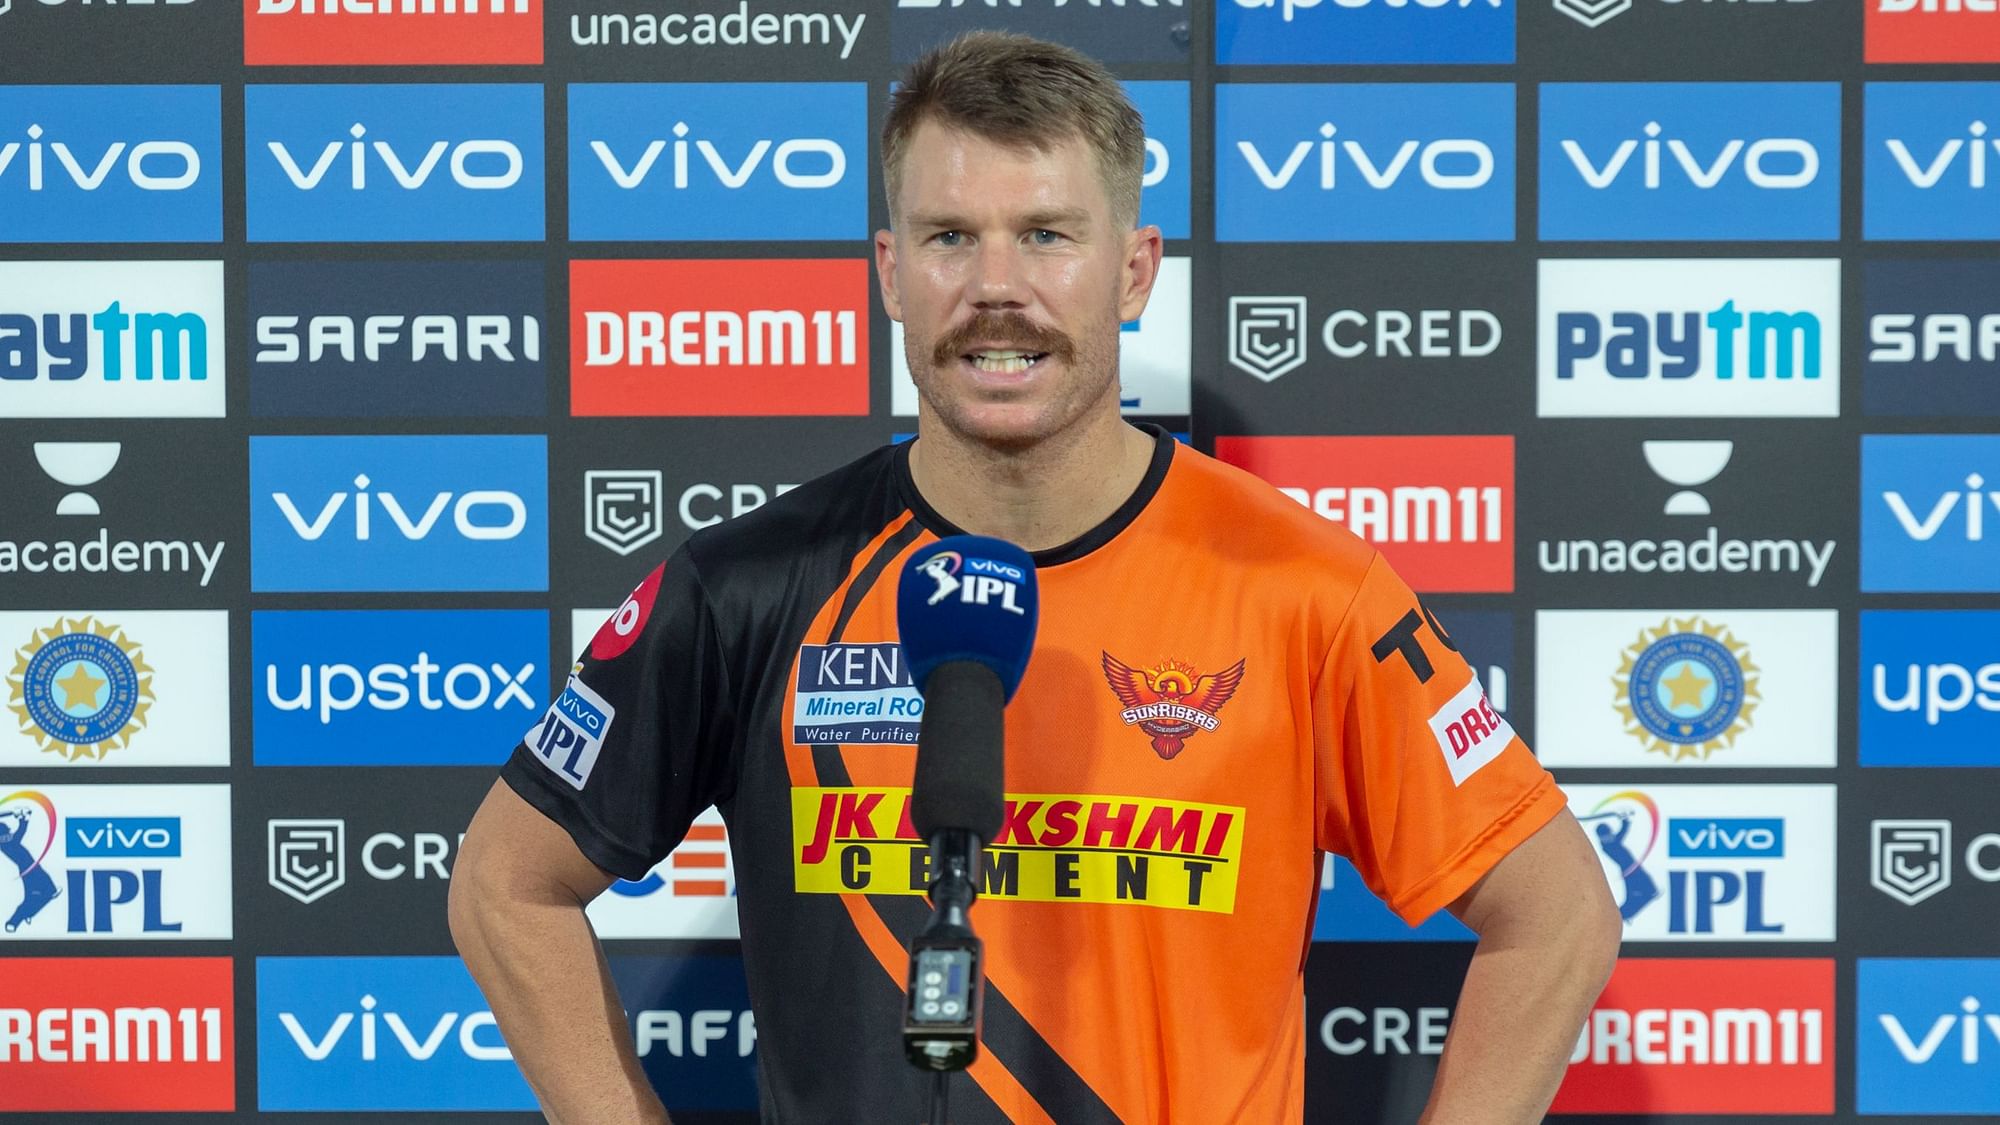 Sunrisers Hyderabad were bowled out for 137 and lost the match by 13 runs.